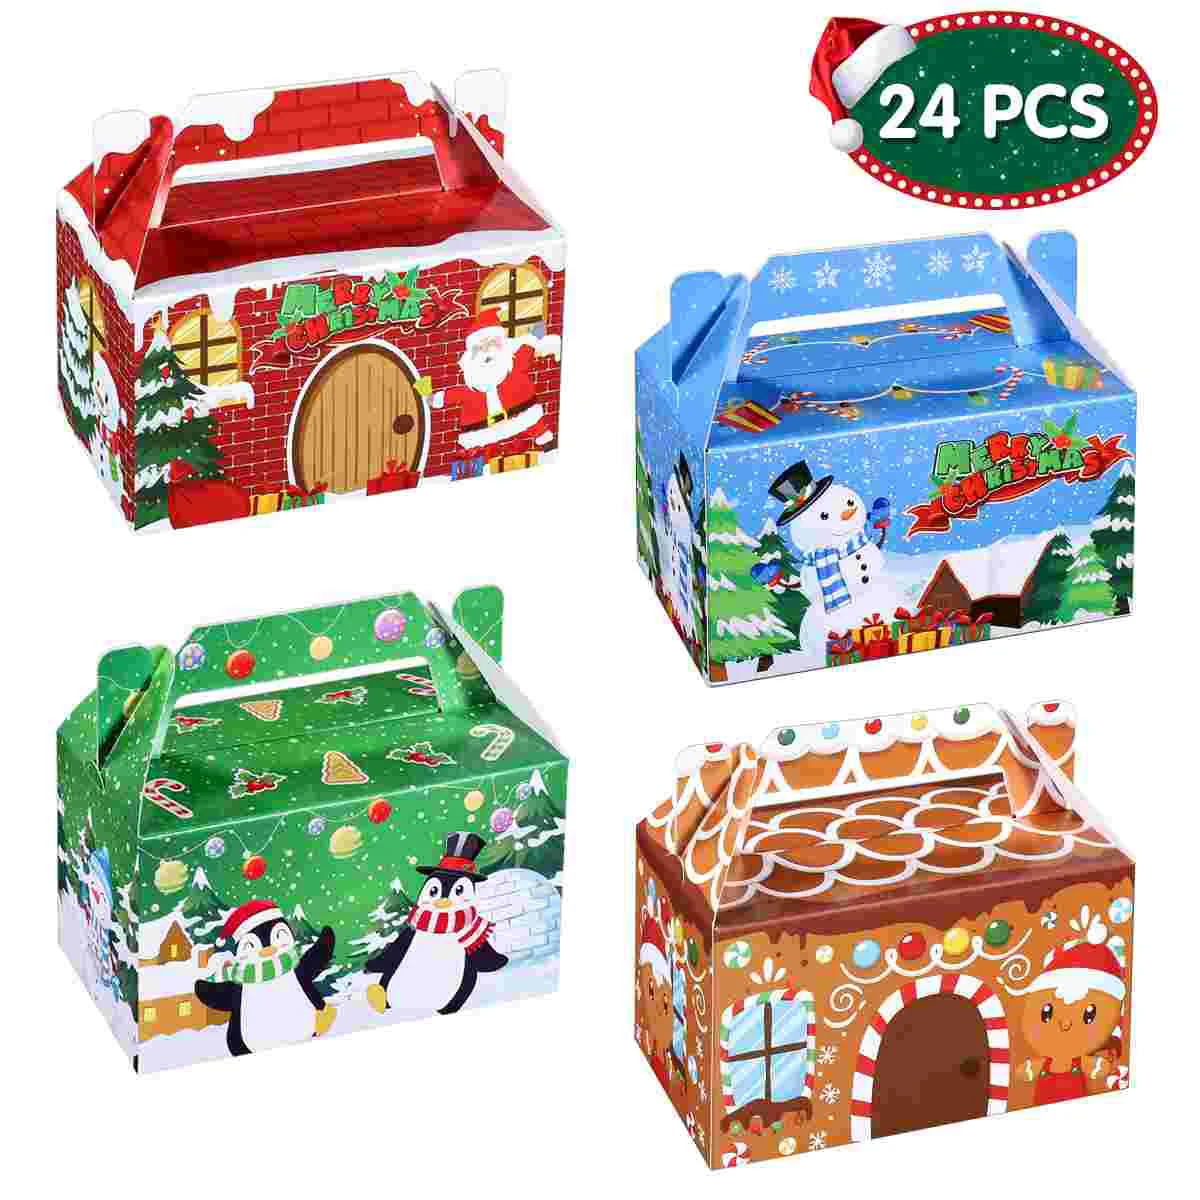 

Hemoton 24pcs Christmas Treat Boxes Handy Paper Boxes Candies Baking Cupcake Muffin Biscuit Boxes Party Favor Holders